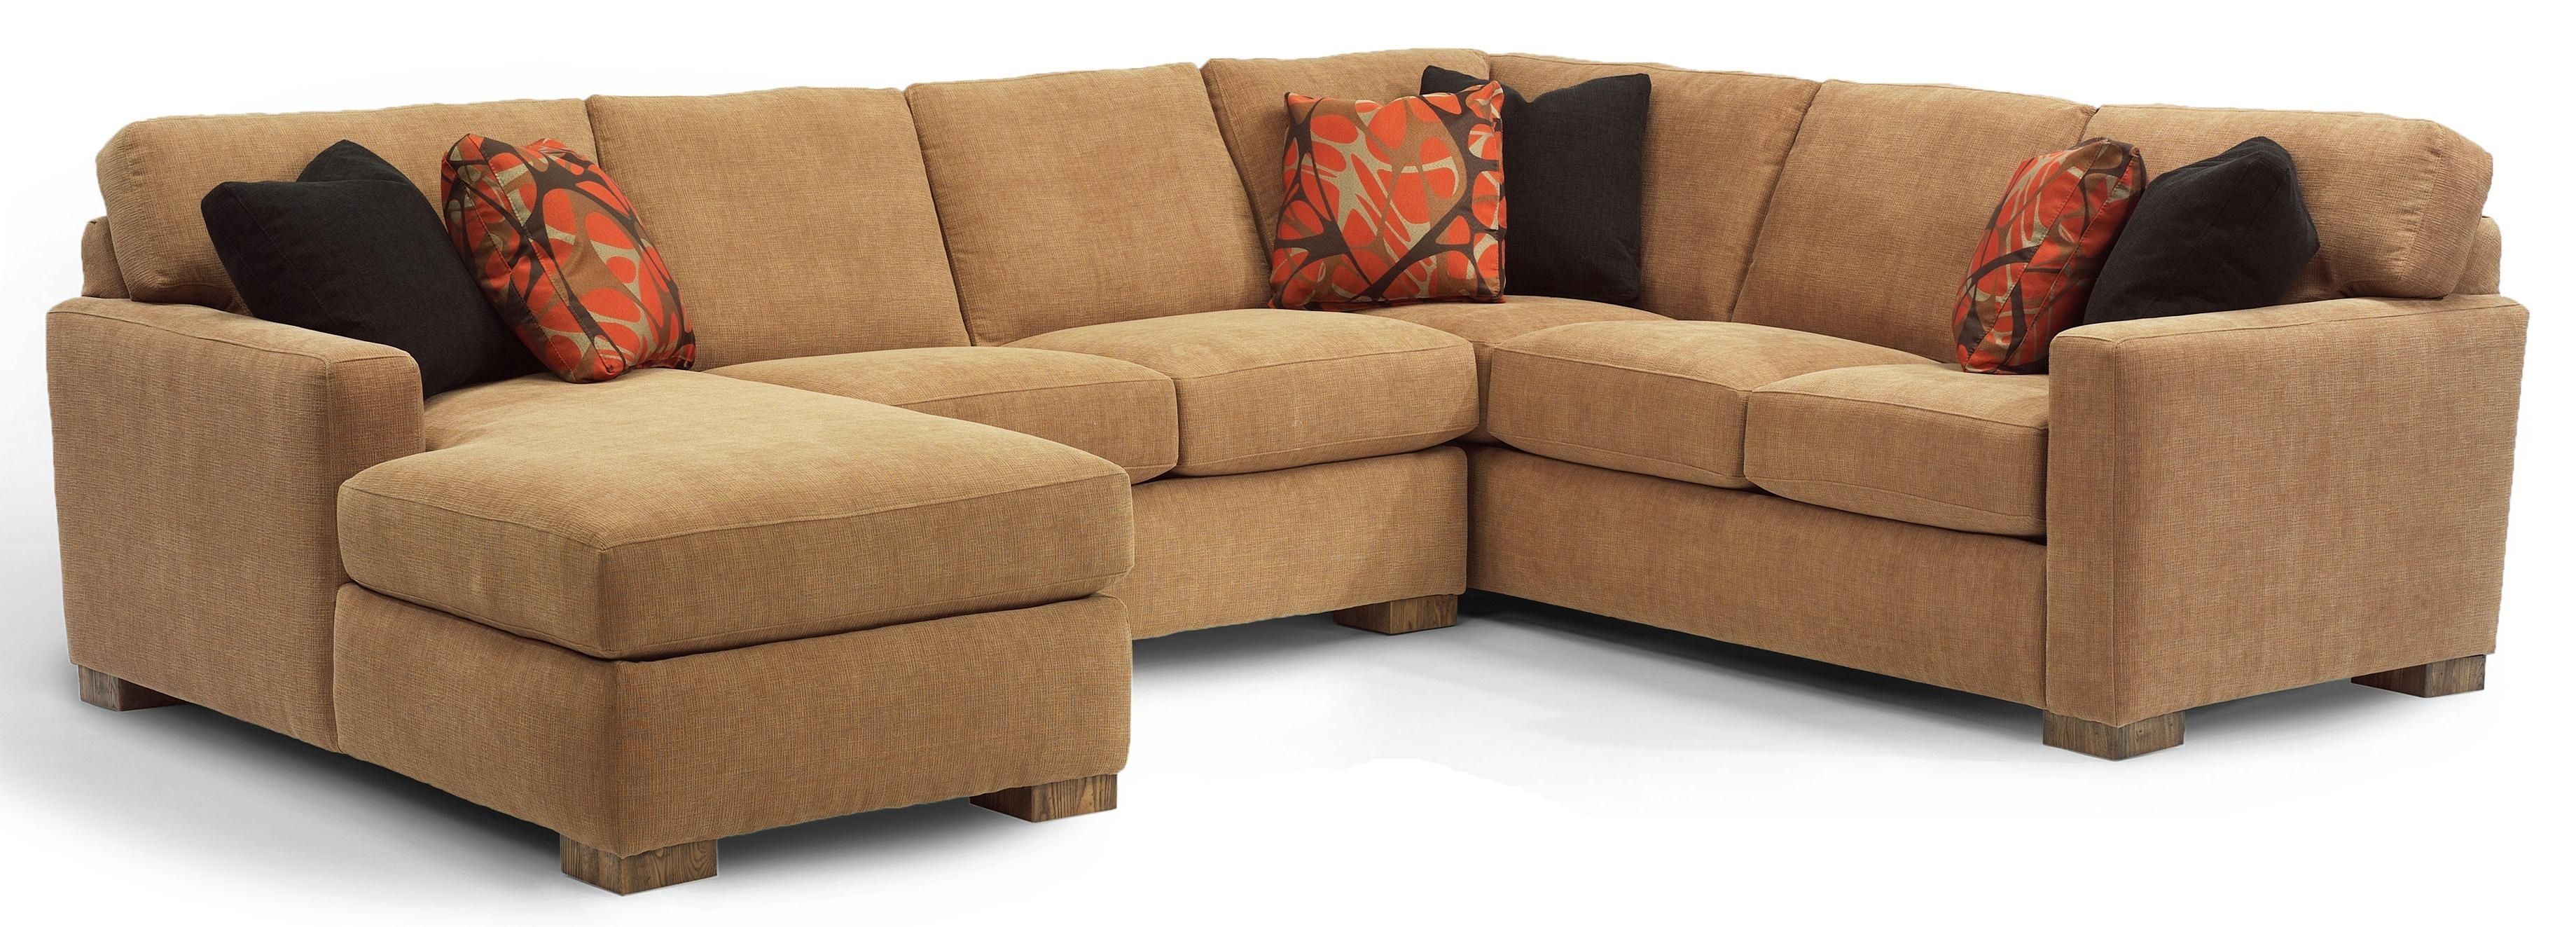 Flexsteel Bryant Contemporary 3 Pc. Sectional Sofa With Laf Chaise Regarding Hattiesburg Ms Sectional Sofas (Photo 4 of 10)